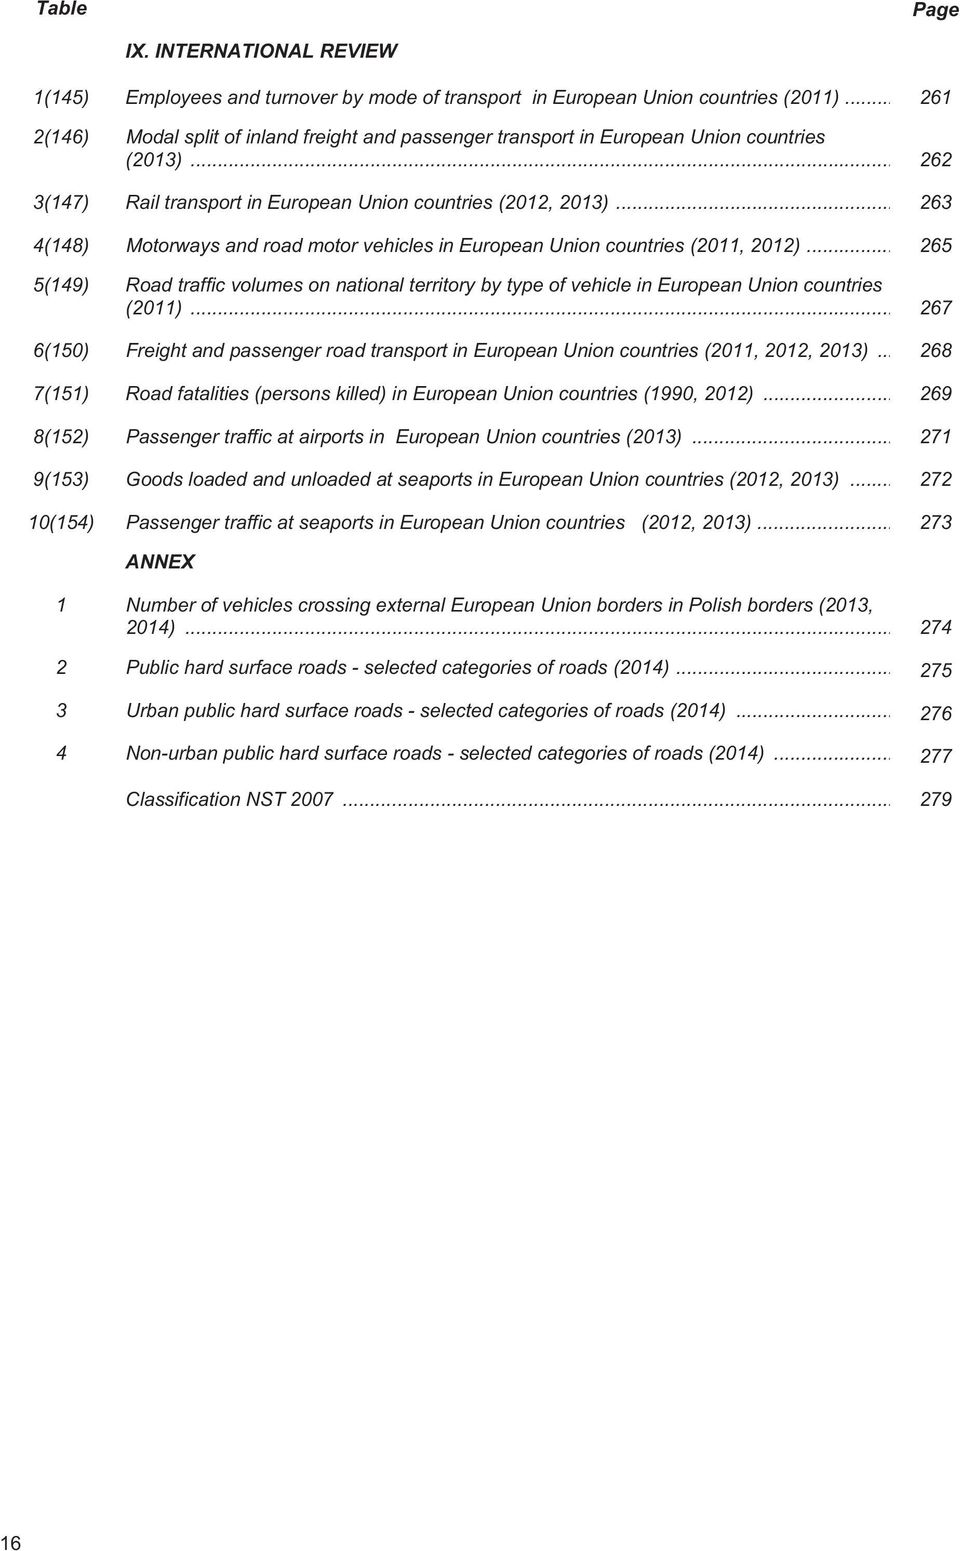 .. 263 4(148) Motorways and road motor vehicles in European Union countries (2011, 2012)... 265 5(149) Road traffic volumes on national territory by type of vehicle in European Union countries (2011).